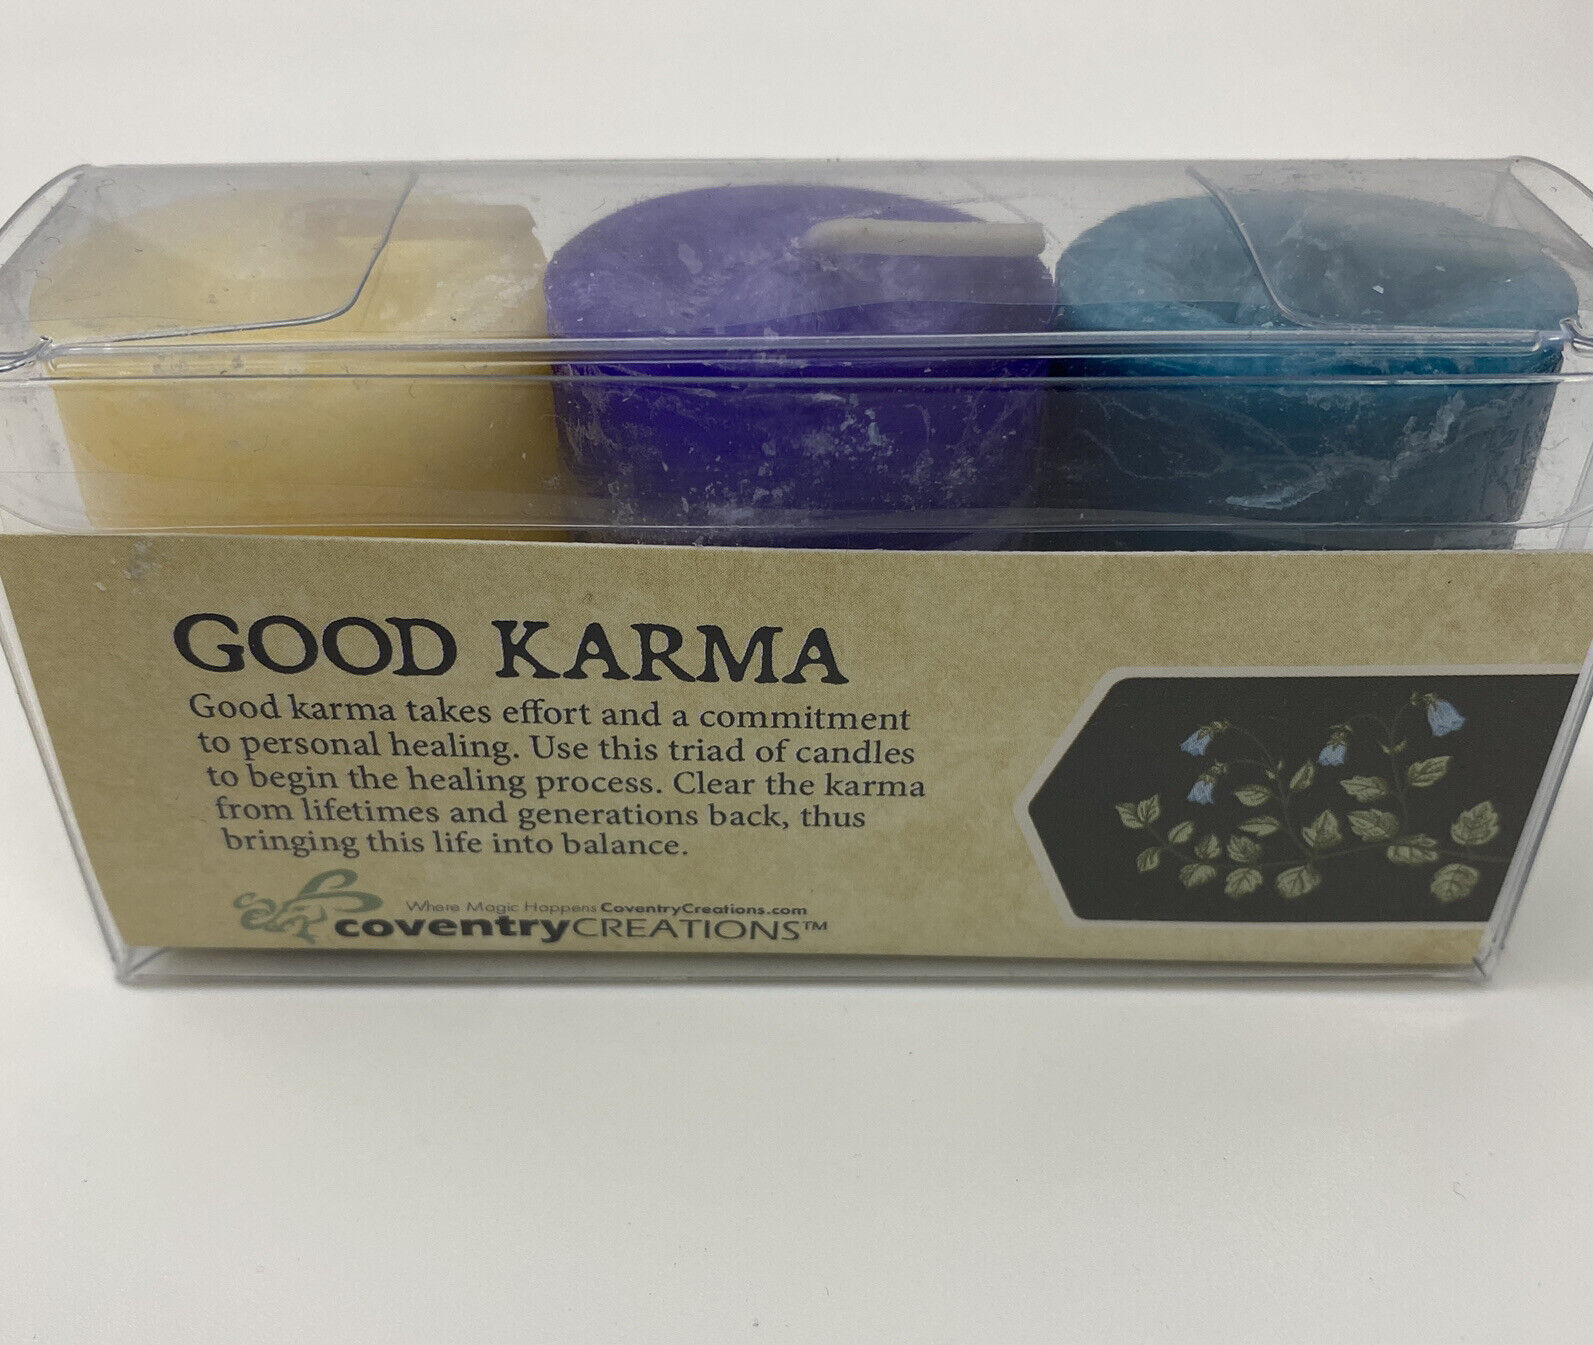 Coventry Creations Blessing Kit GOOD KARMA Blessed Herbal Candles Three Votives